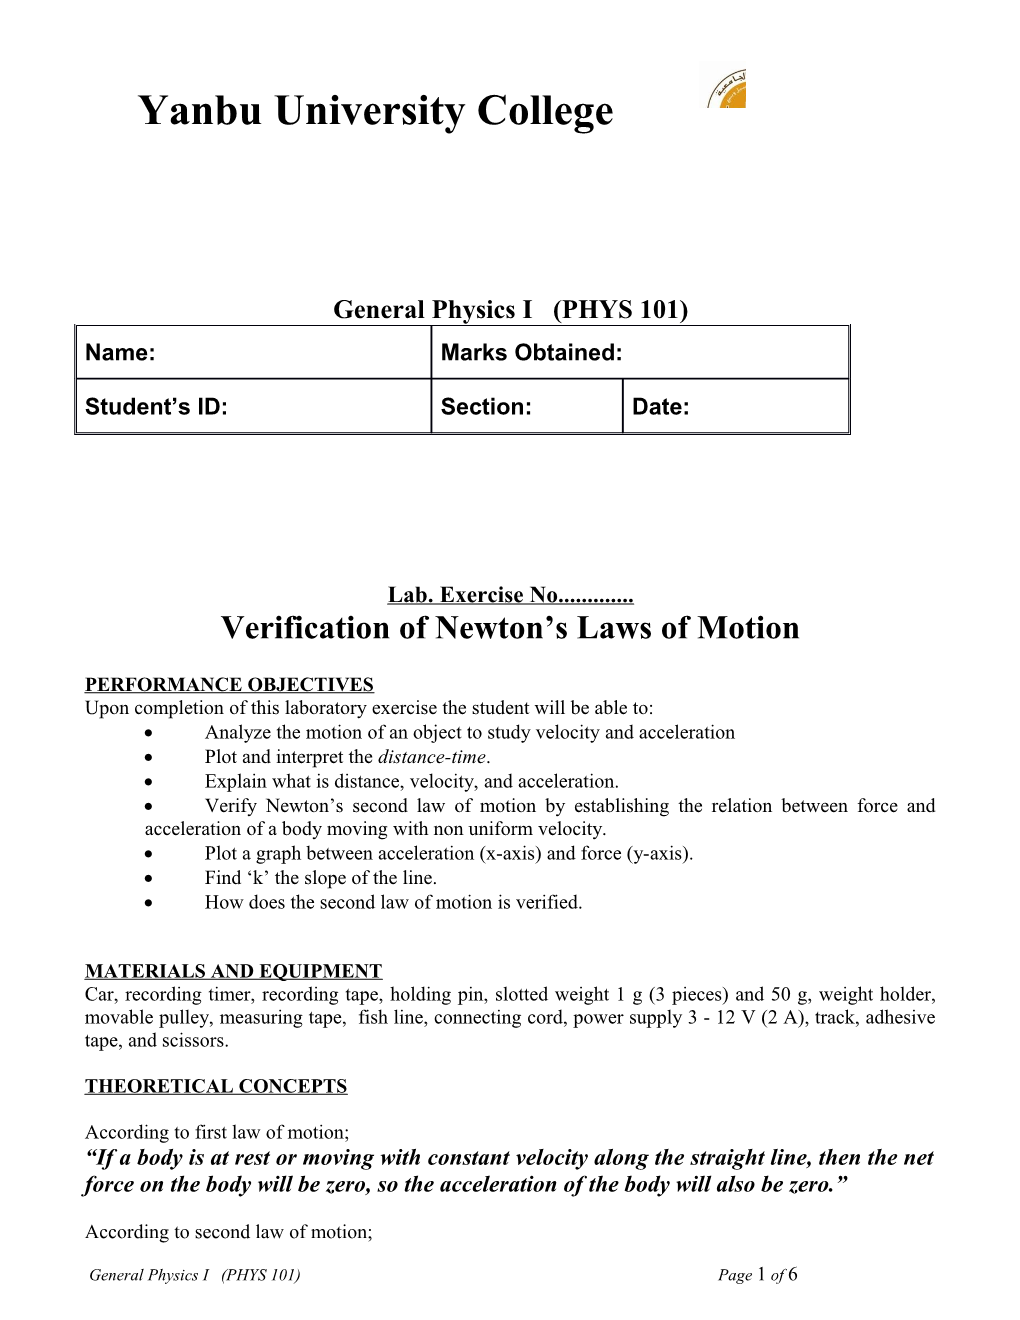 Verification of Newton S Laws of Motion